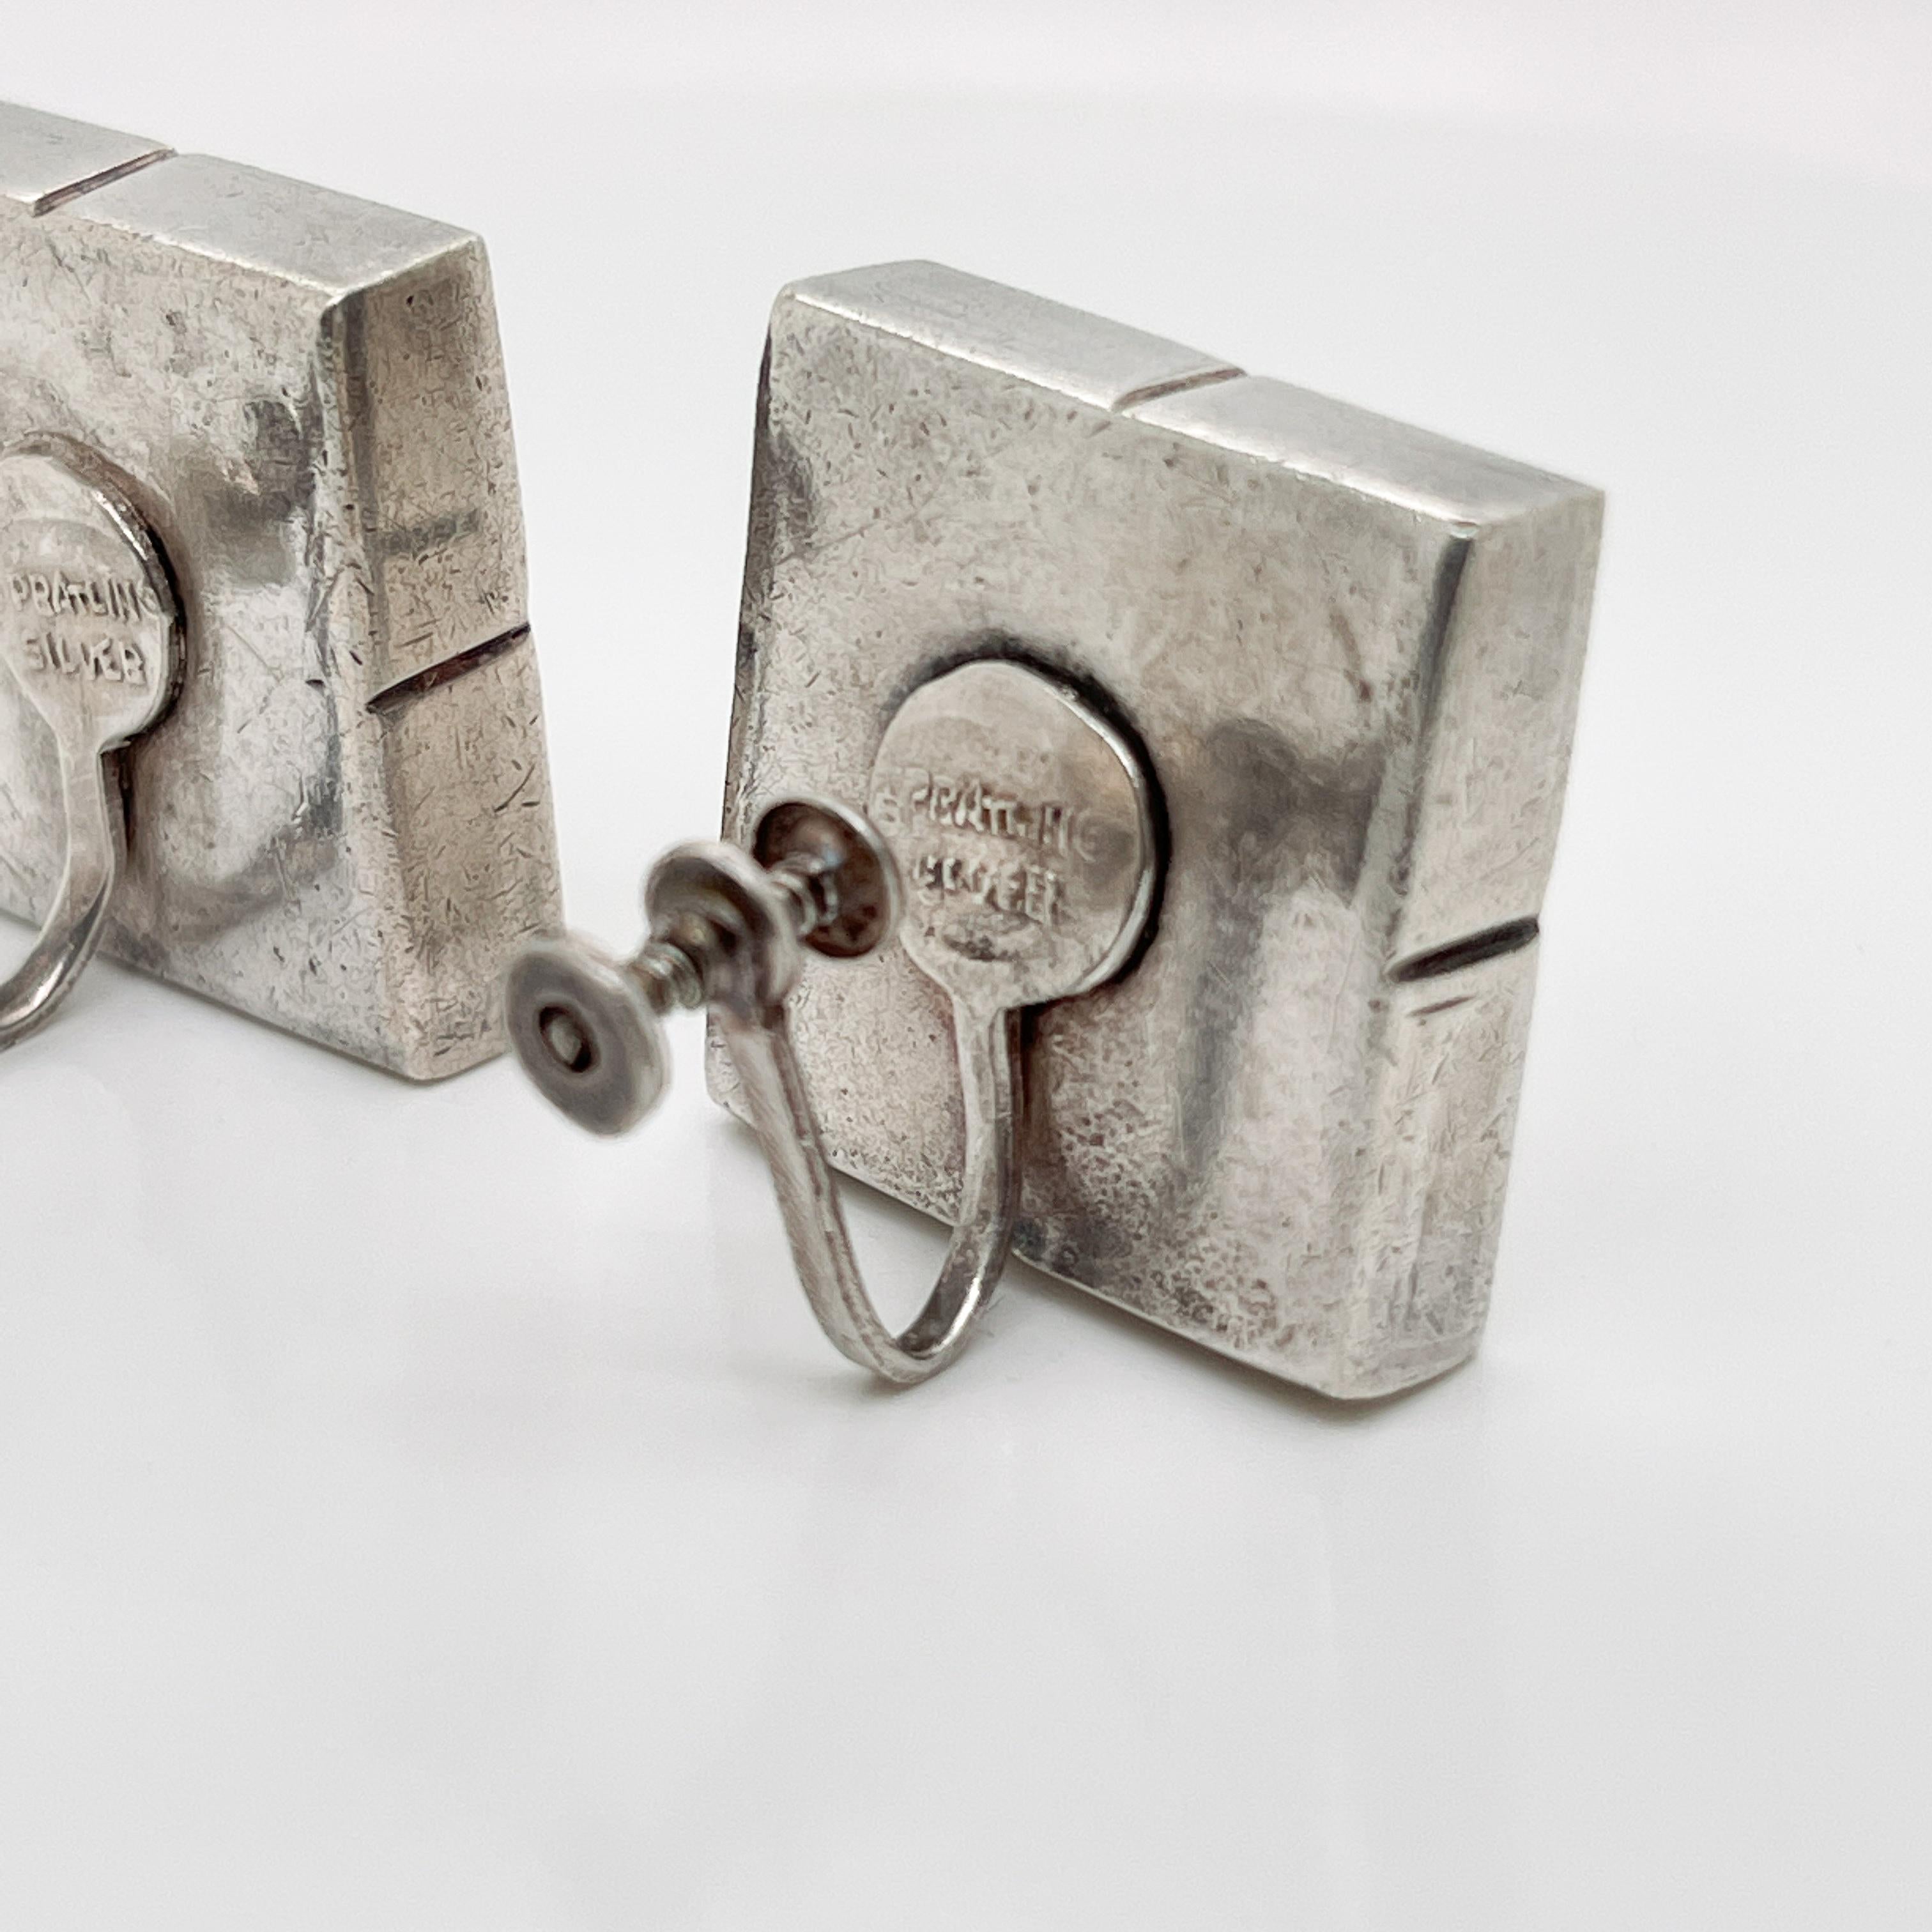 Vintage Mexican William Spratling Silver Modernist Square Cube Earrings & Brooch For Sale 2